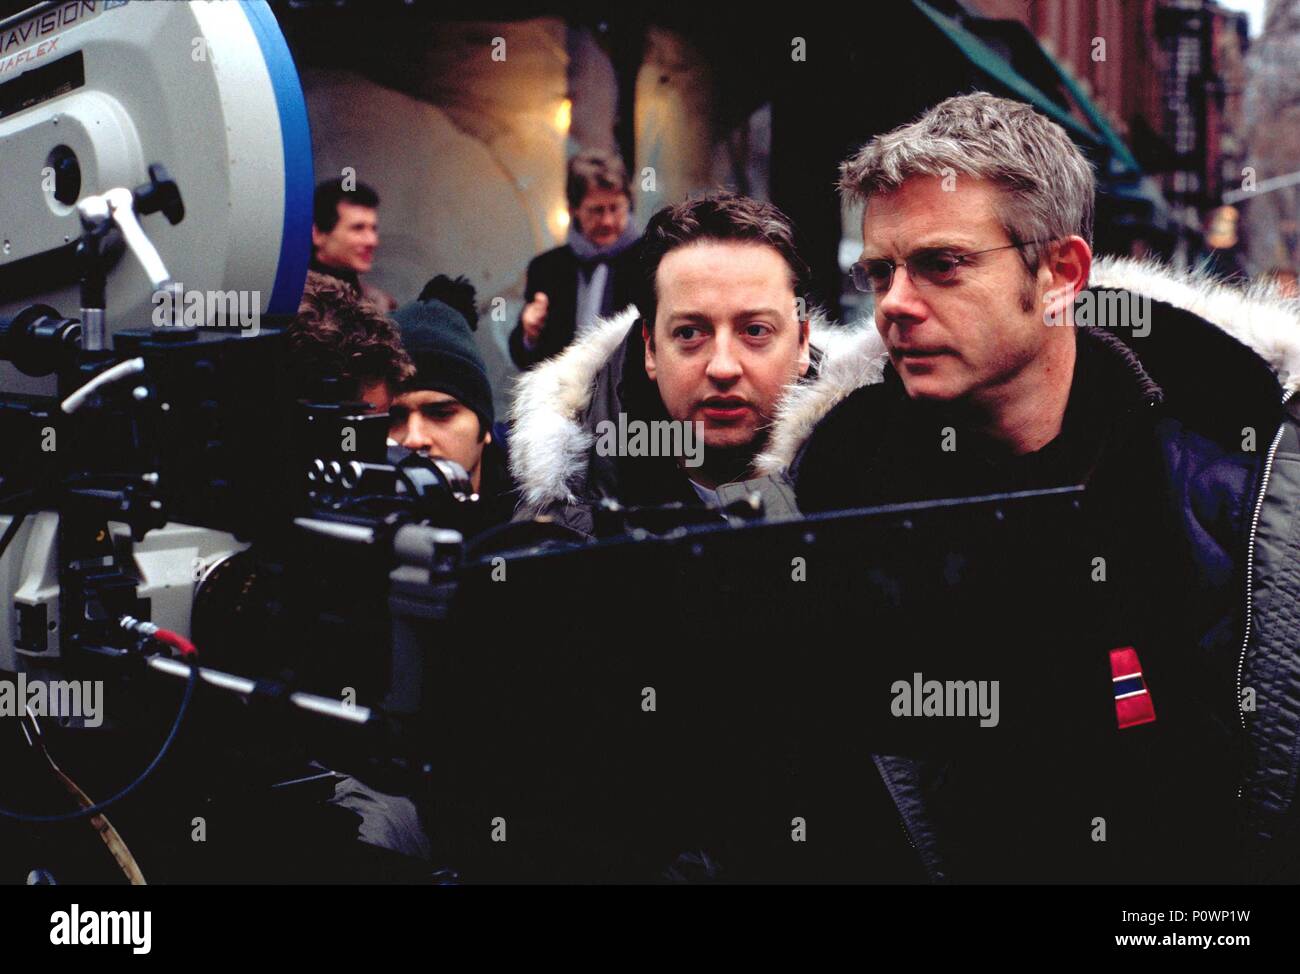 Original Film Title: HOURS, THE.  English Title: HOURS, THE.  Film Director: STEPHEN DALDRY.  Year: 2002.  Stars: STEPHEN DALDRY. Copyright: Editorial inside use only. This is a publicly distributed handout. Access rights only, no license of copyright provided. Mandatory authorization to Visual Icon (www.visual-icon.com) is required for the reproduction of this image. Credit: PARAMOUNT PICTURES / Album Stock Photo